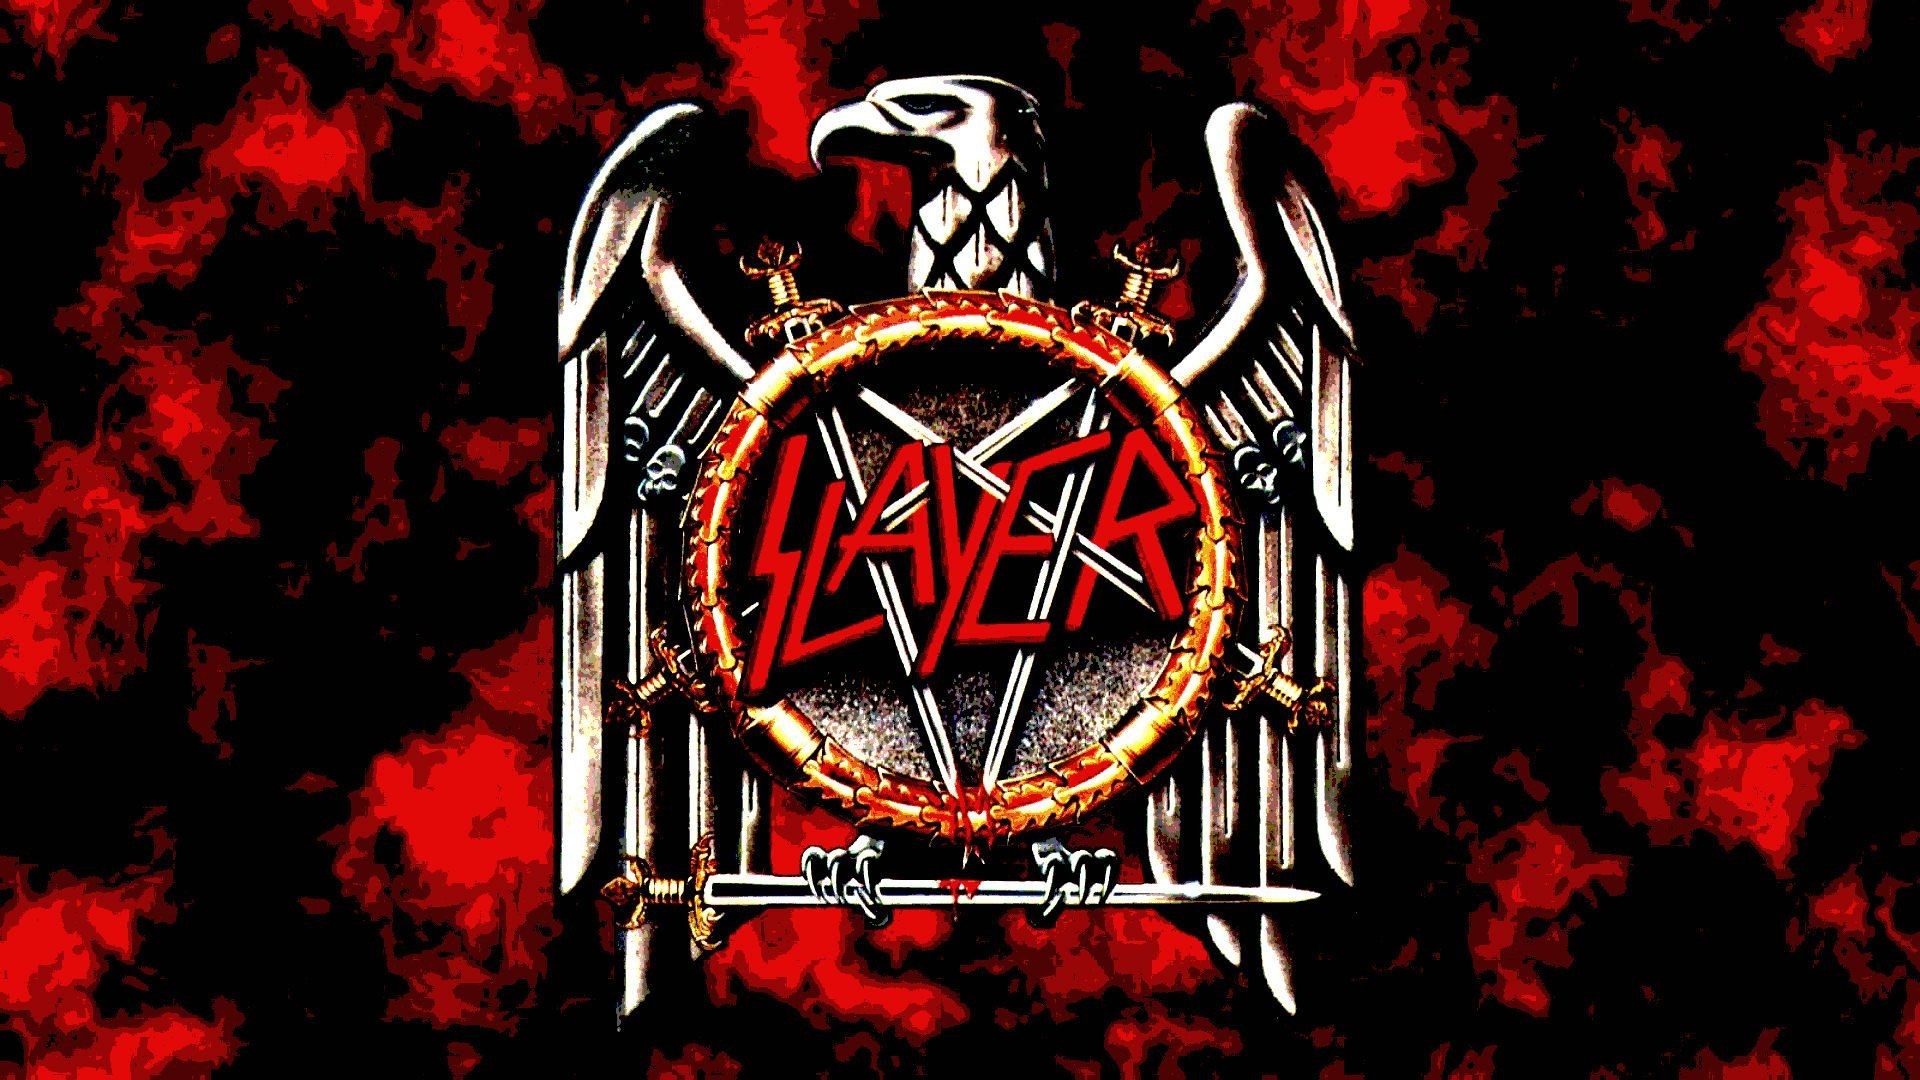 1920x1080 Download Slayer Band Wallpapers 